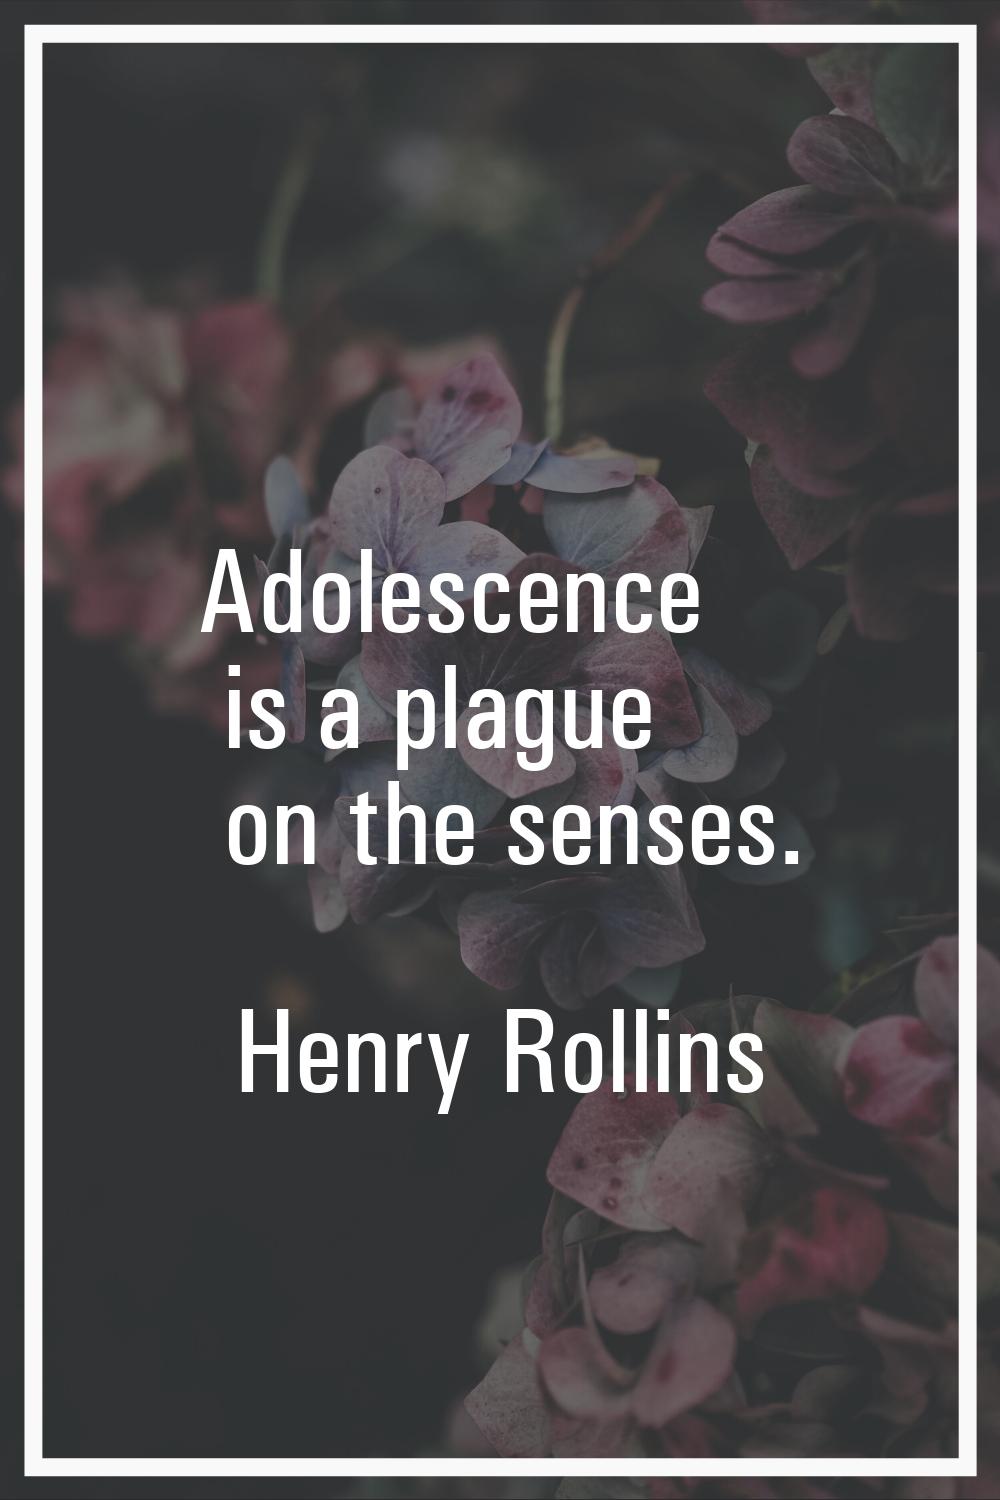 Adolescence is a plague on the senses.